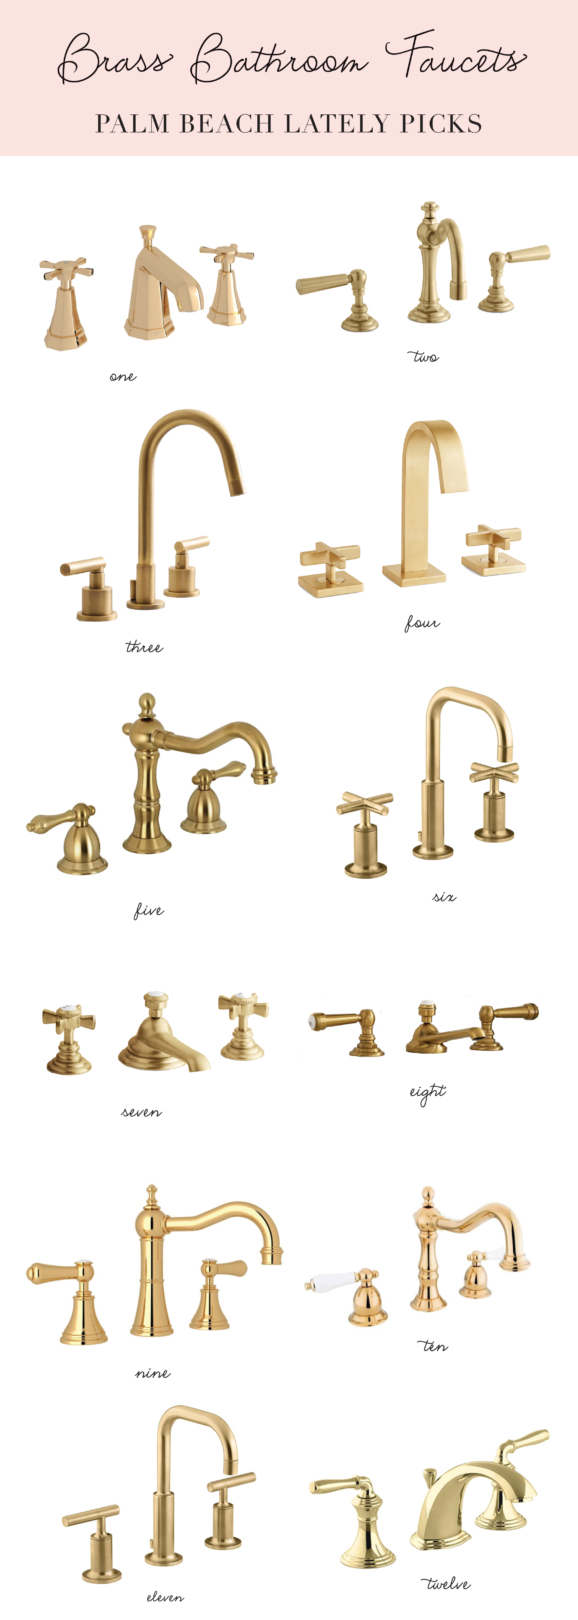 Palm Beach Lately Brass Bathroom Faucets 